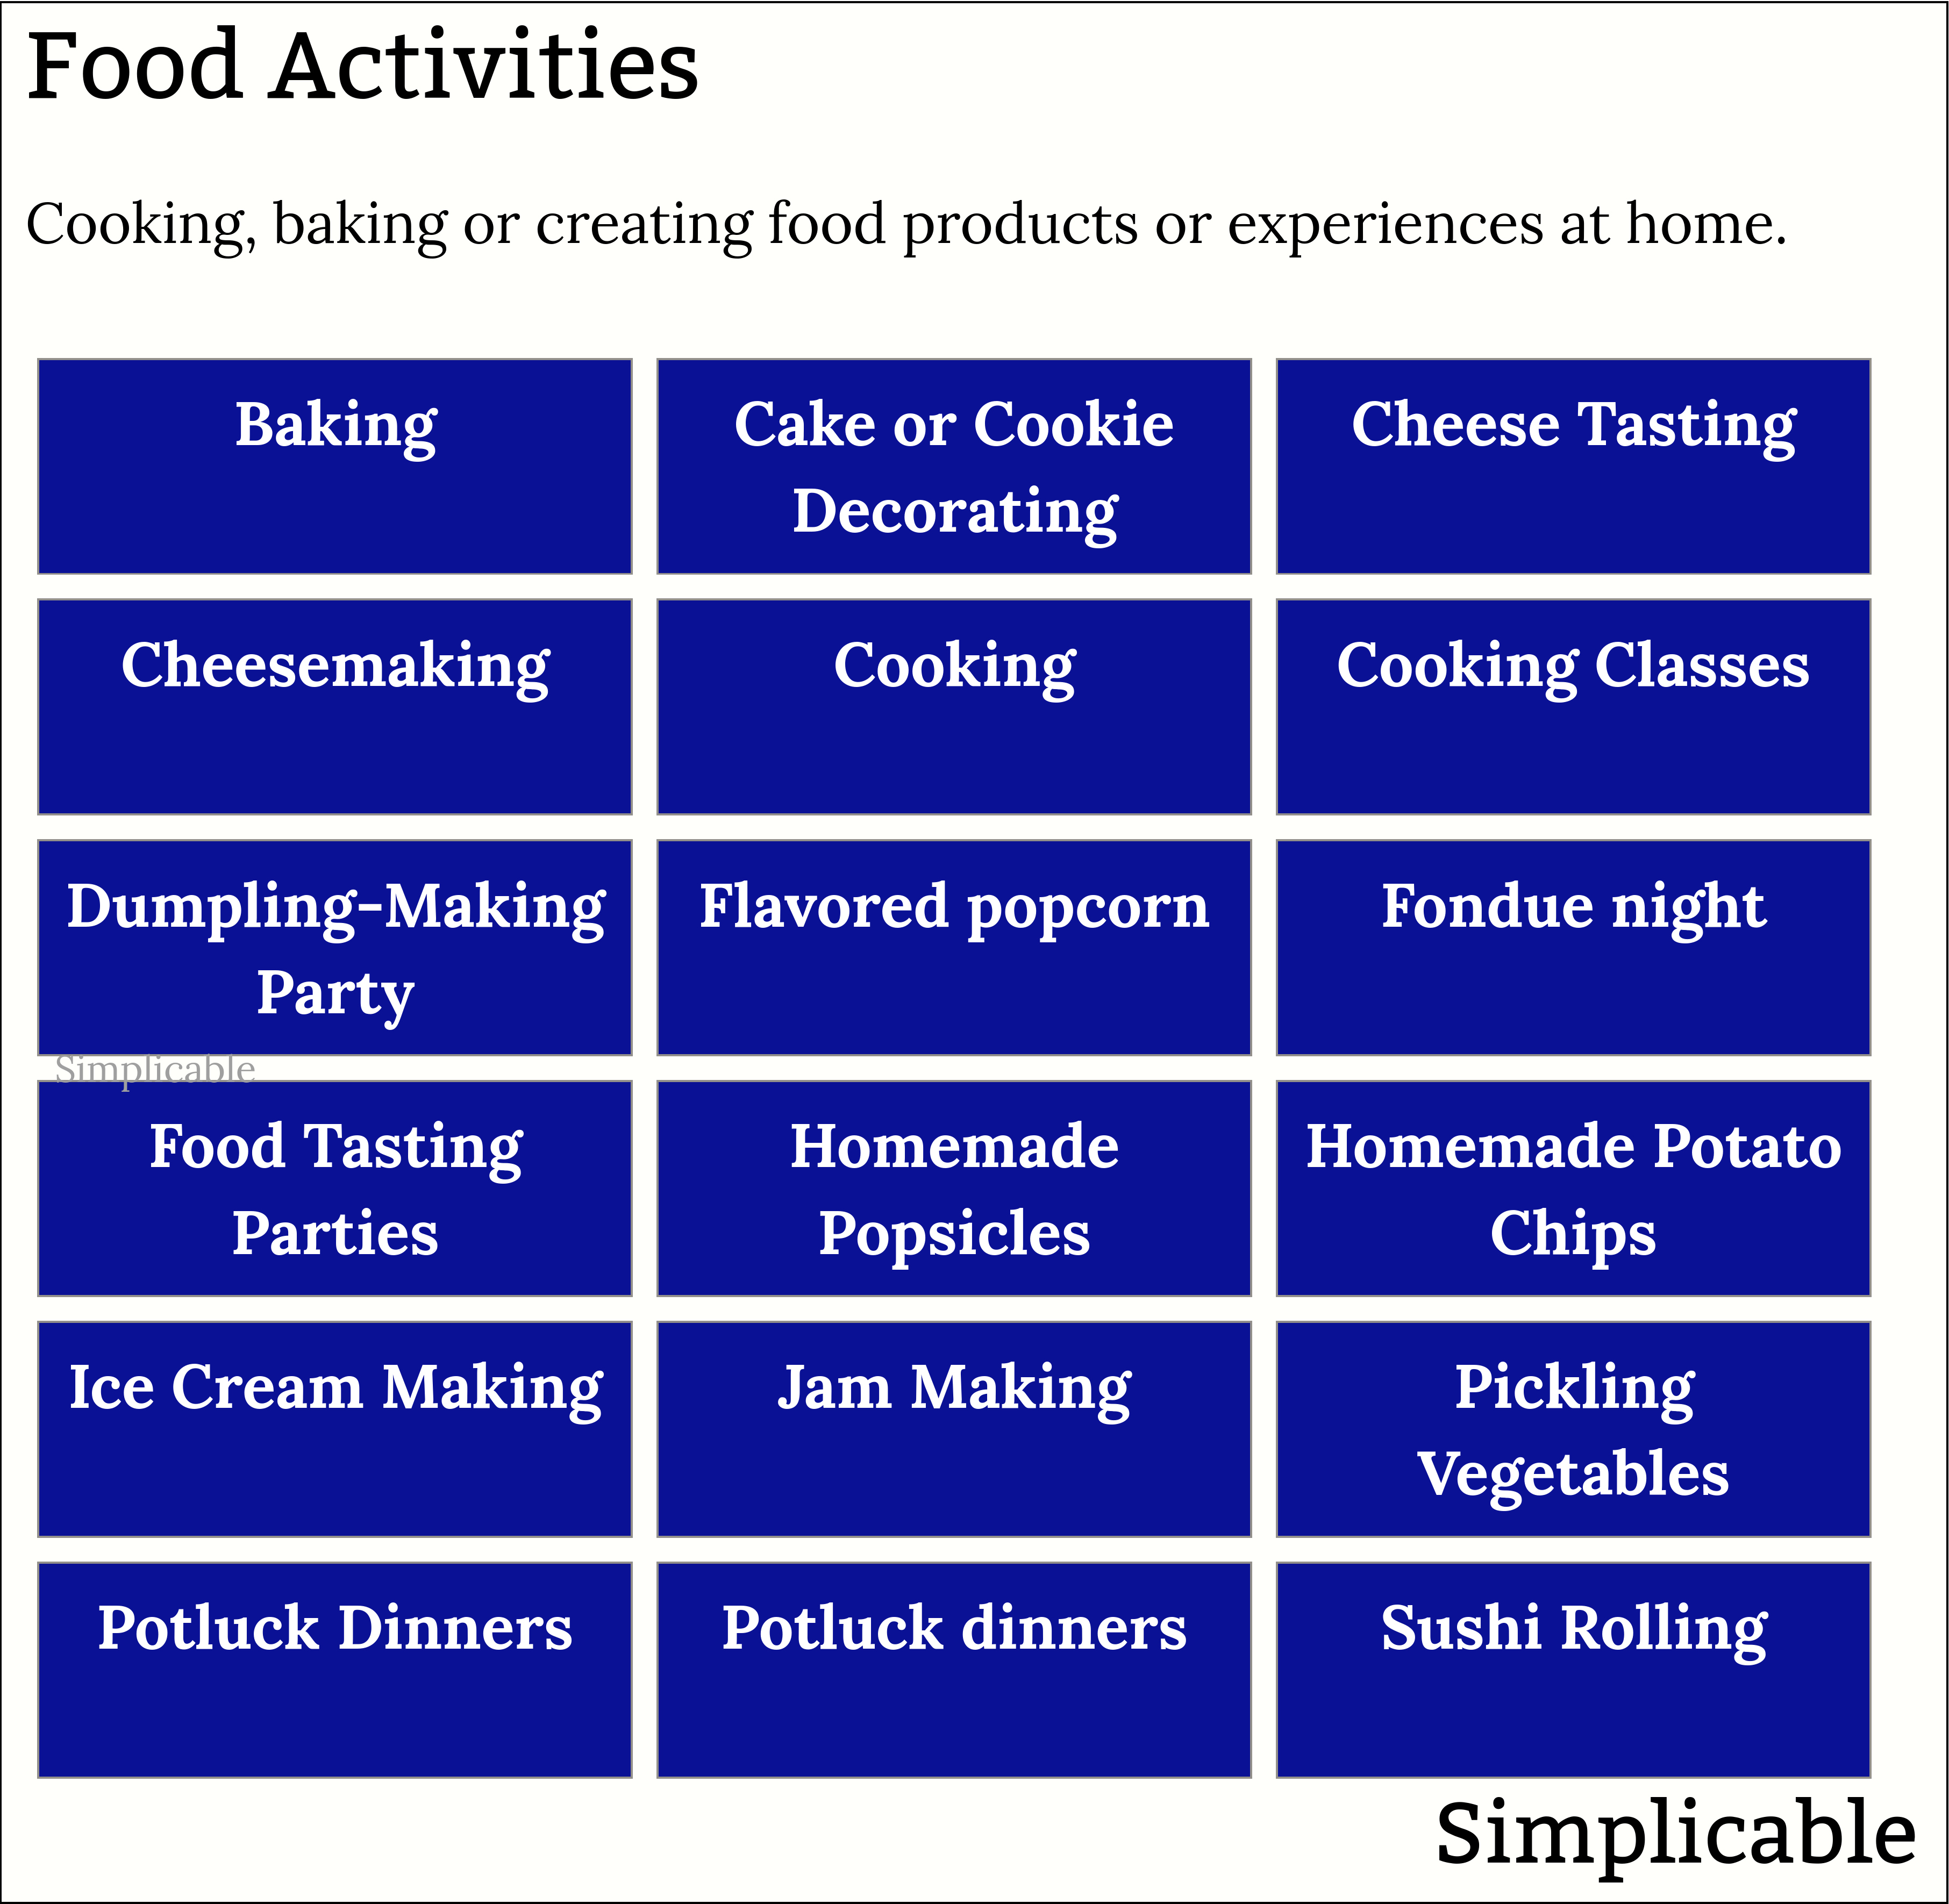 examples of food activities at home